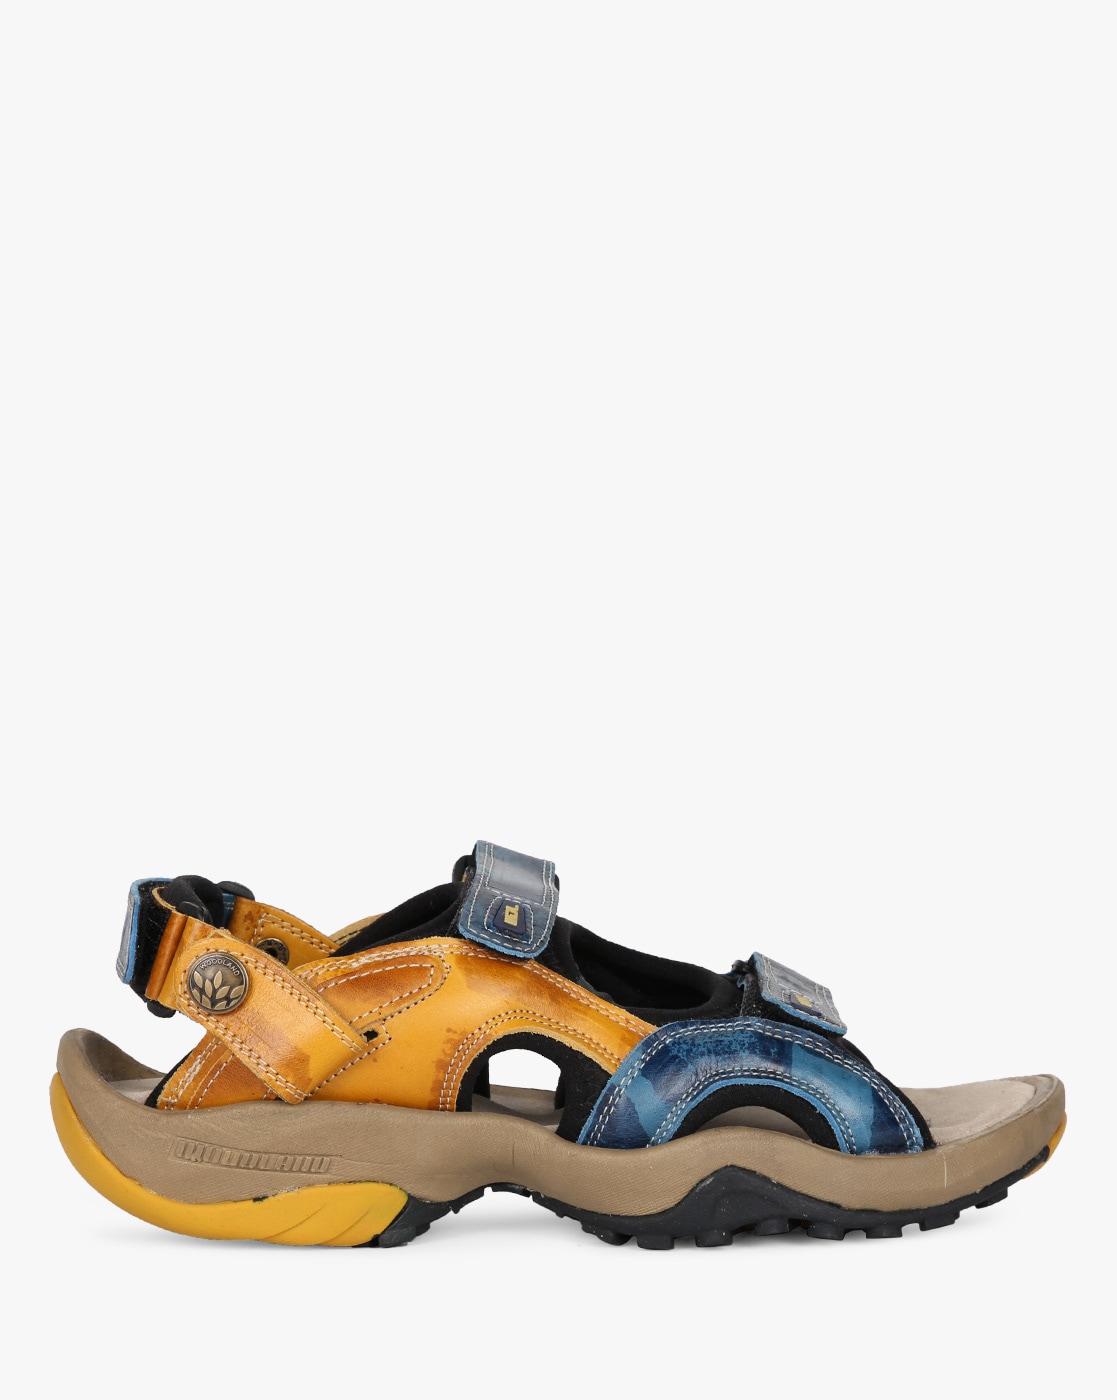 Woodland Men BLUE Sports Sandals Best Price in India | Woodland Men BLUE  Sports Sandals Compare Price List From Woodland Sandals Floaters 4127921 |  Buyhatke